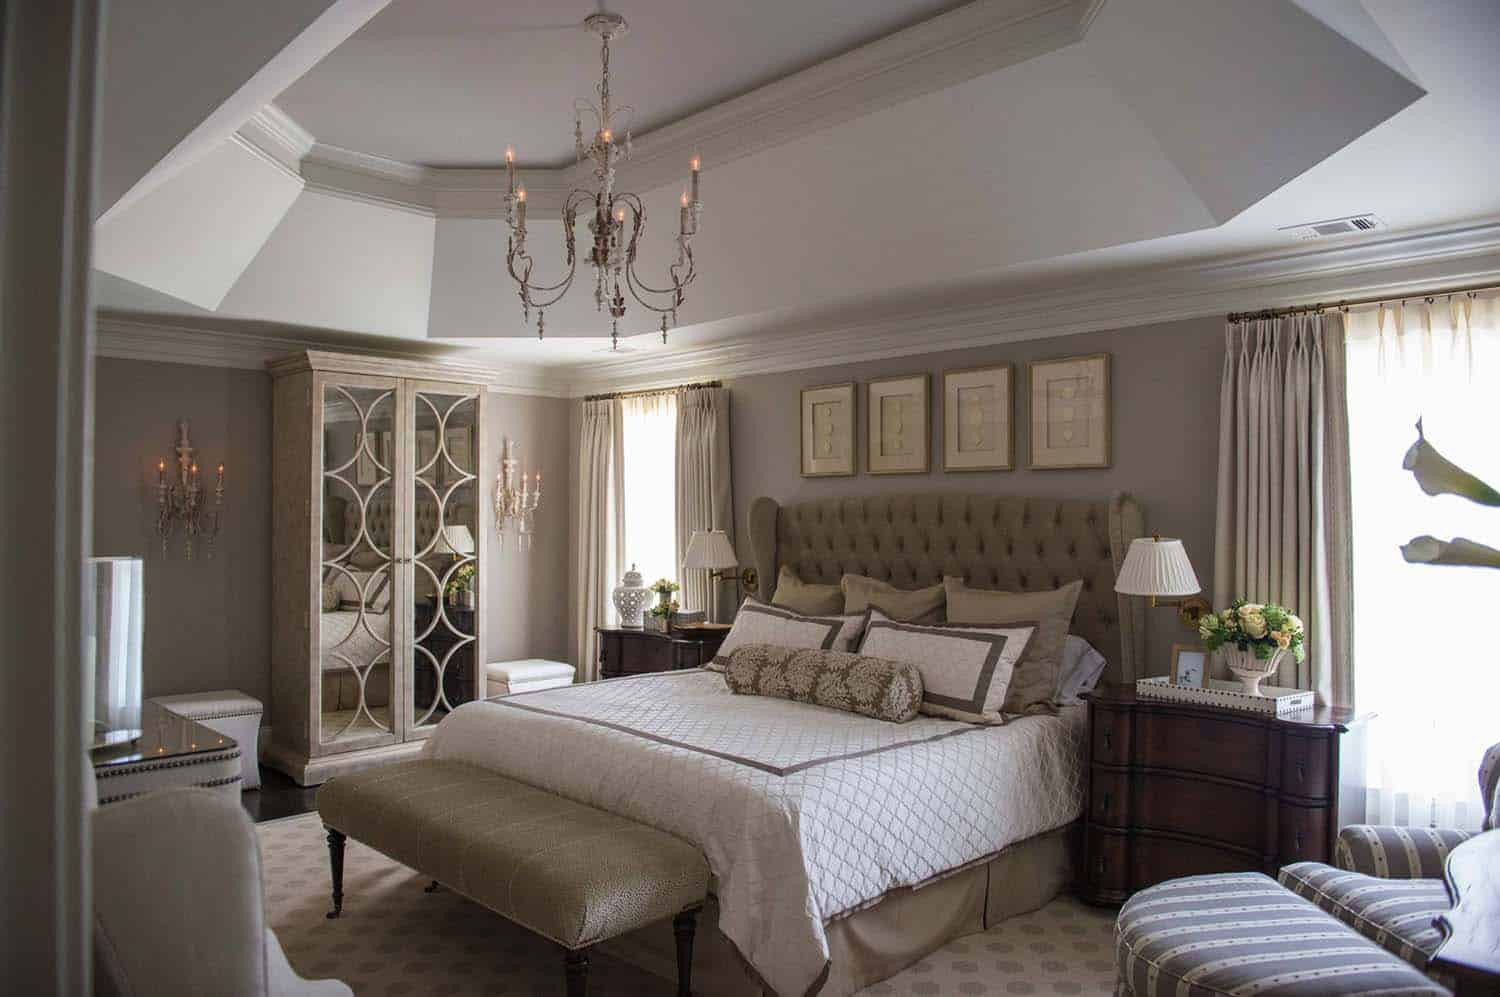 Master Bedroom Decorating Ideas
 20 Serene And Elegant Master Bedroom Decorating Ideas